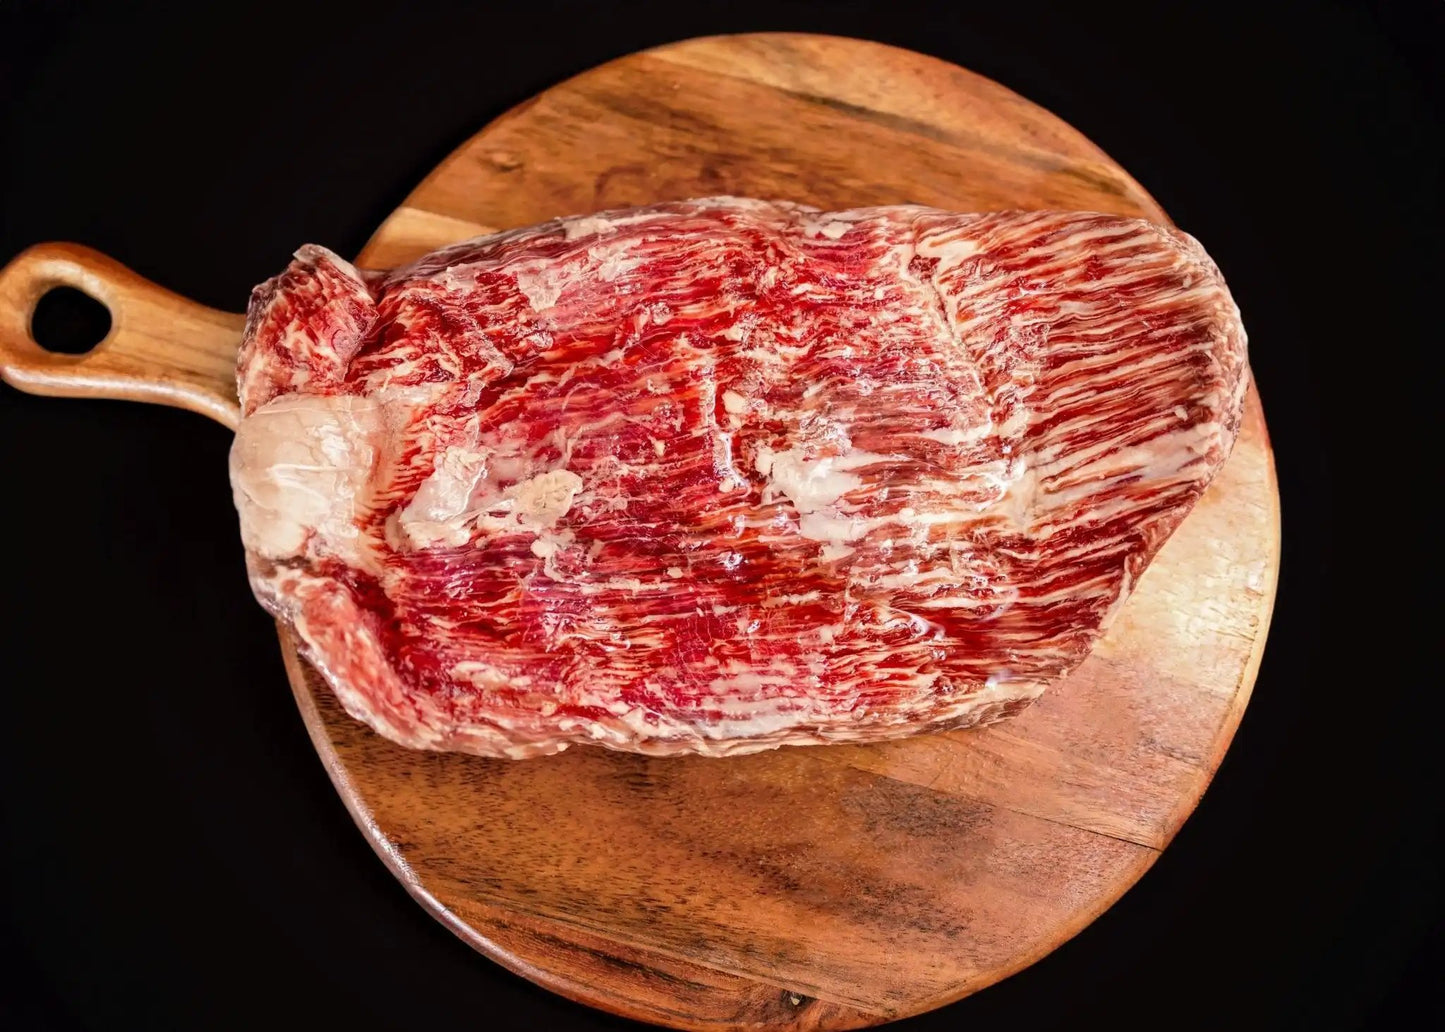 100% All-Natural Grass-Fed Pasture-Raised Wagyu Flank Steak - The Hufeisen-Ranch (WYO Wagyu)